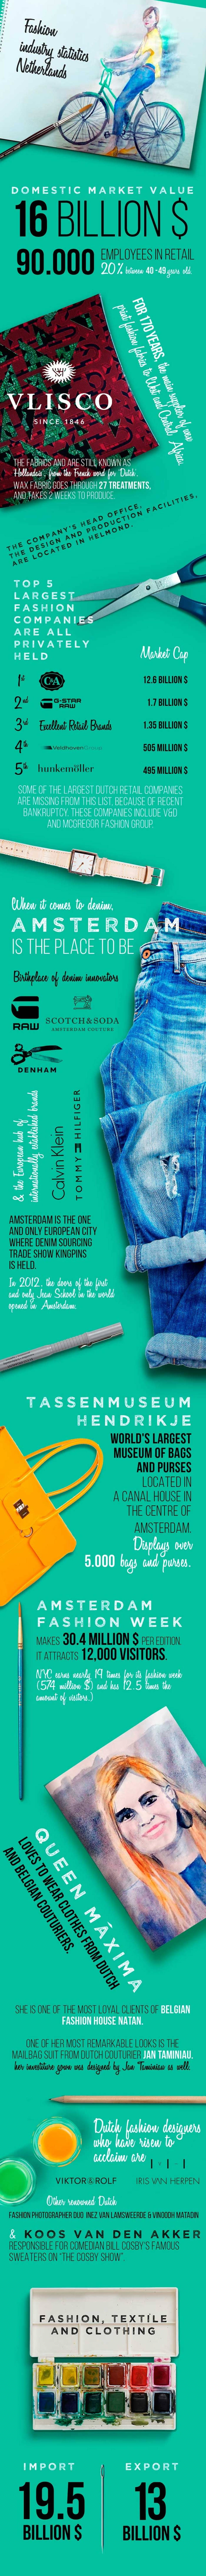 Fashion industry statistics infographics part 5: The Netherlands